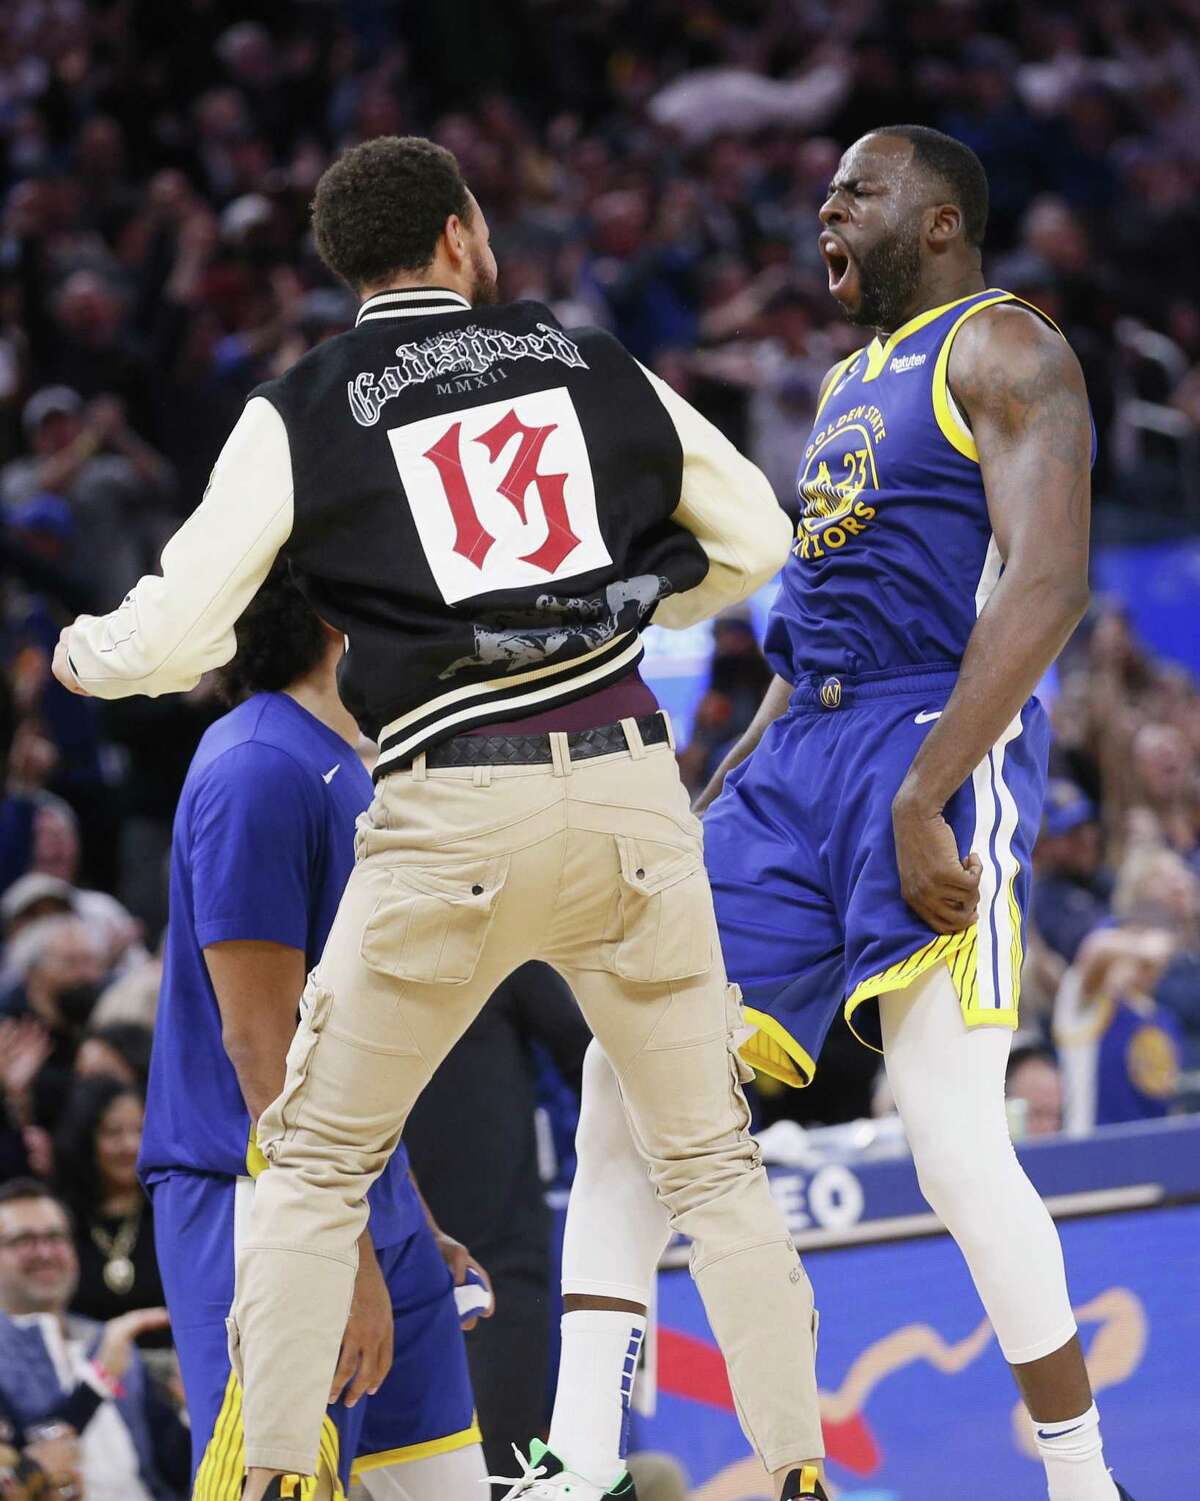 Golden State Warriors forward Draymond Green (23) and Warriors guard Stephen Curry celebrate against the Portland Trail Blazers during a timeout late in the fourth quarter of an NBA game at Chase Center in San Francisco, Calif., Friday, Dec. 30, 2022. The Warriors won 118-112.